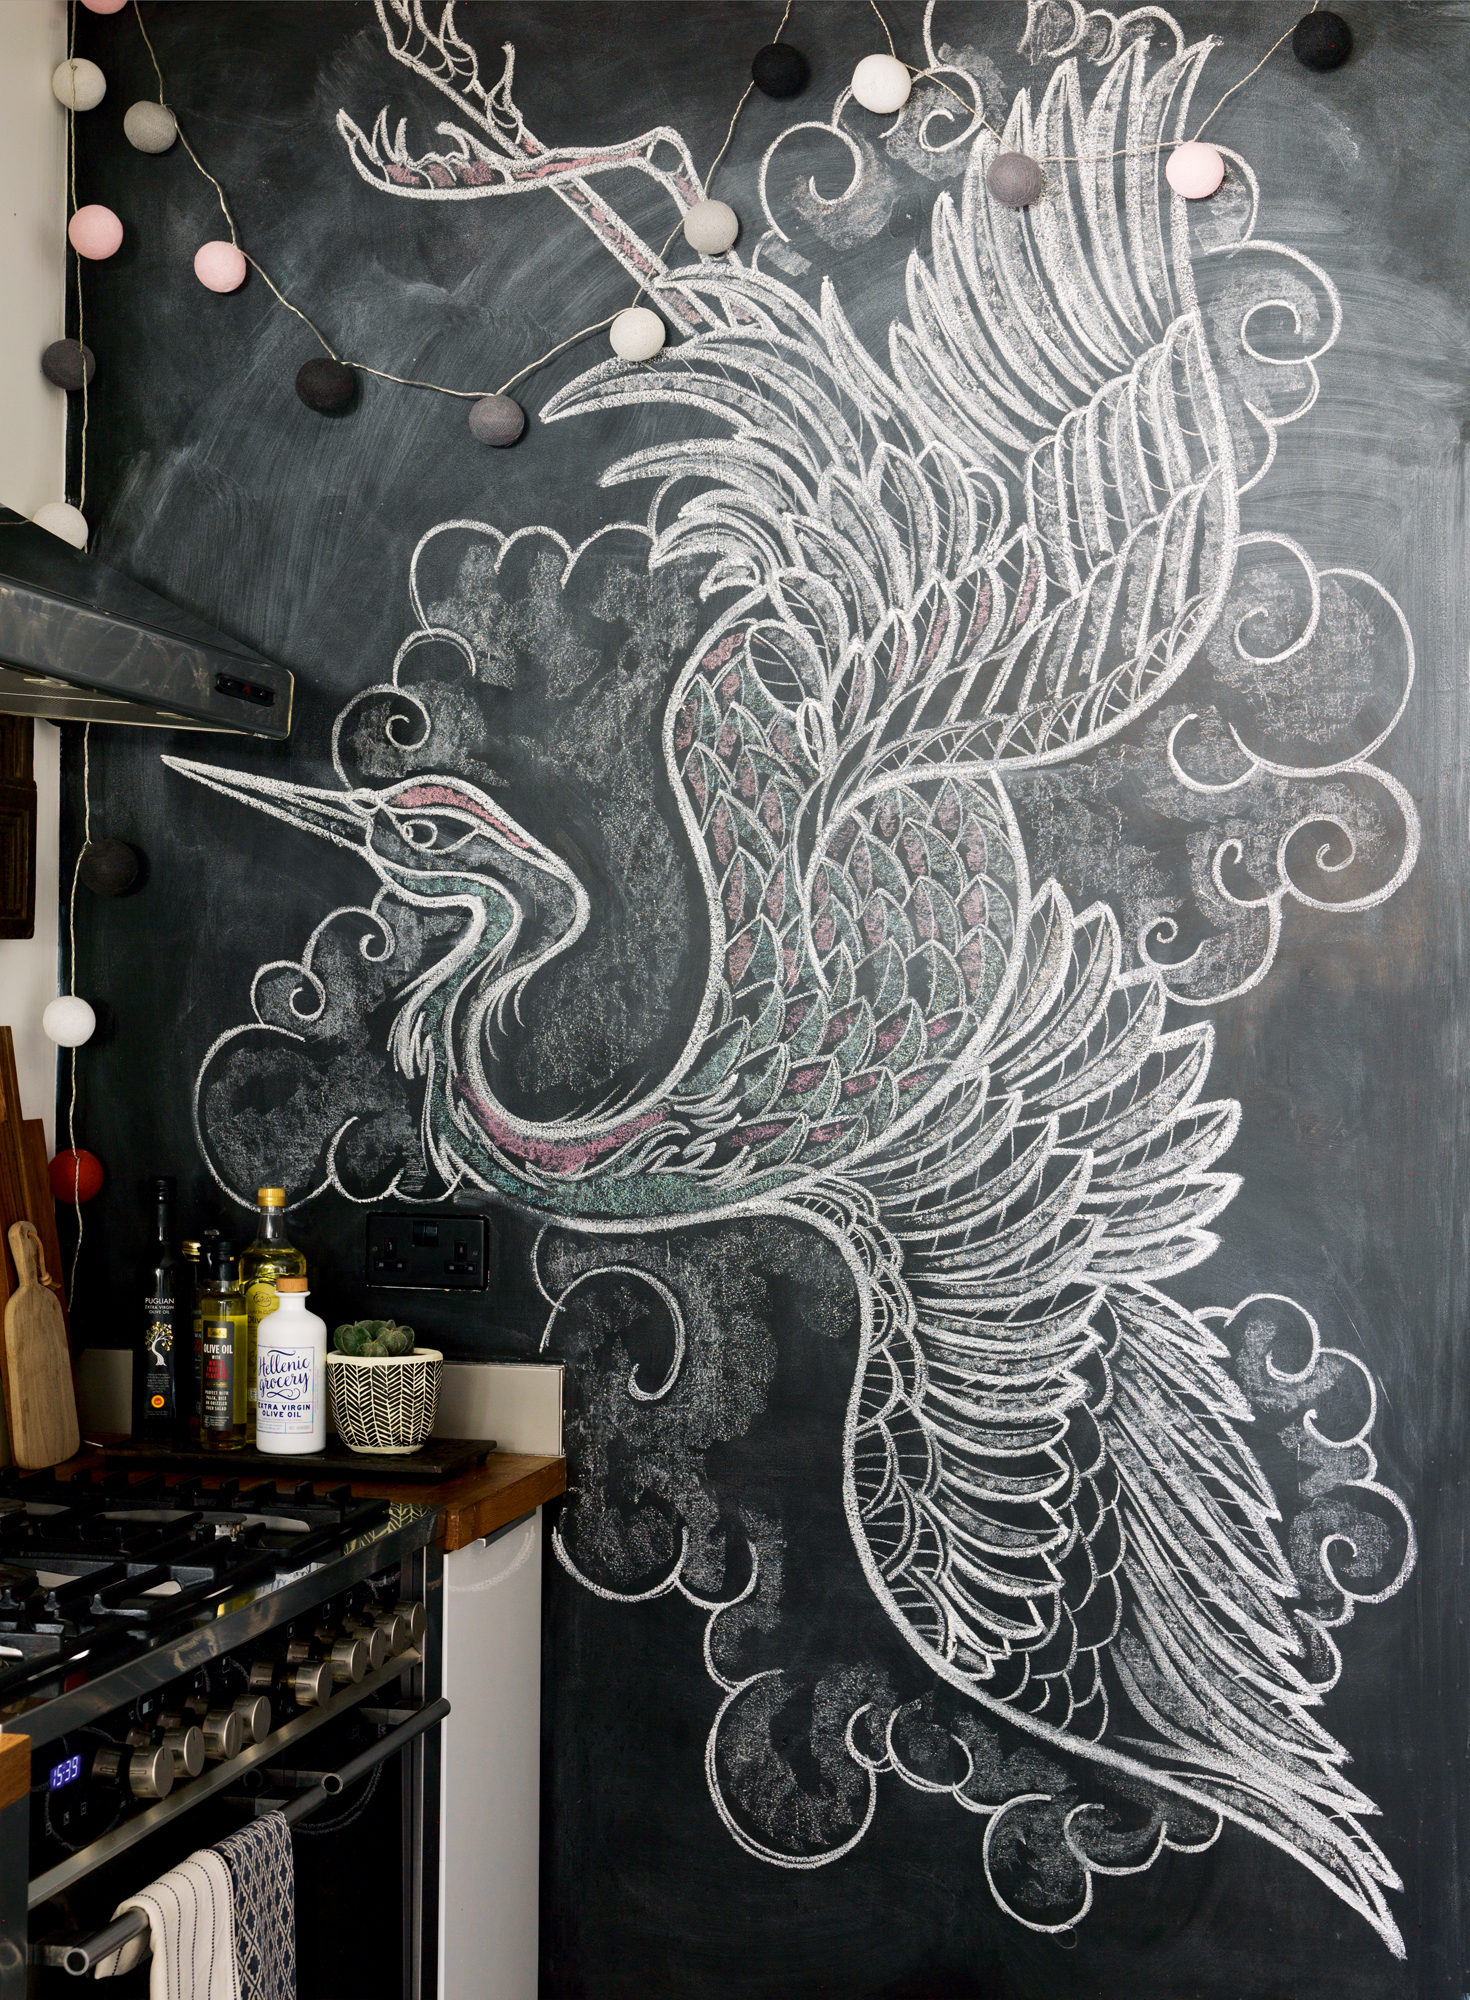 5 Things to Consider Before Painting a Chalkboard Wall